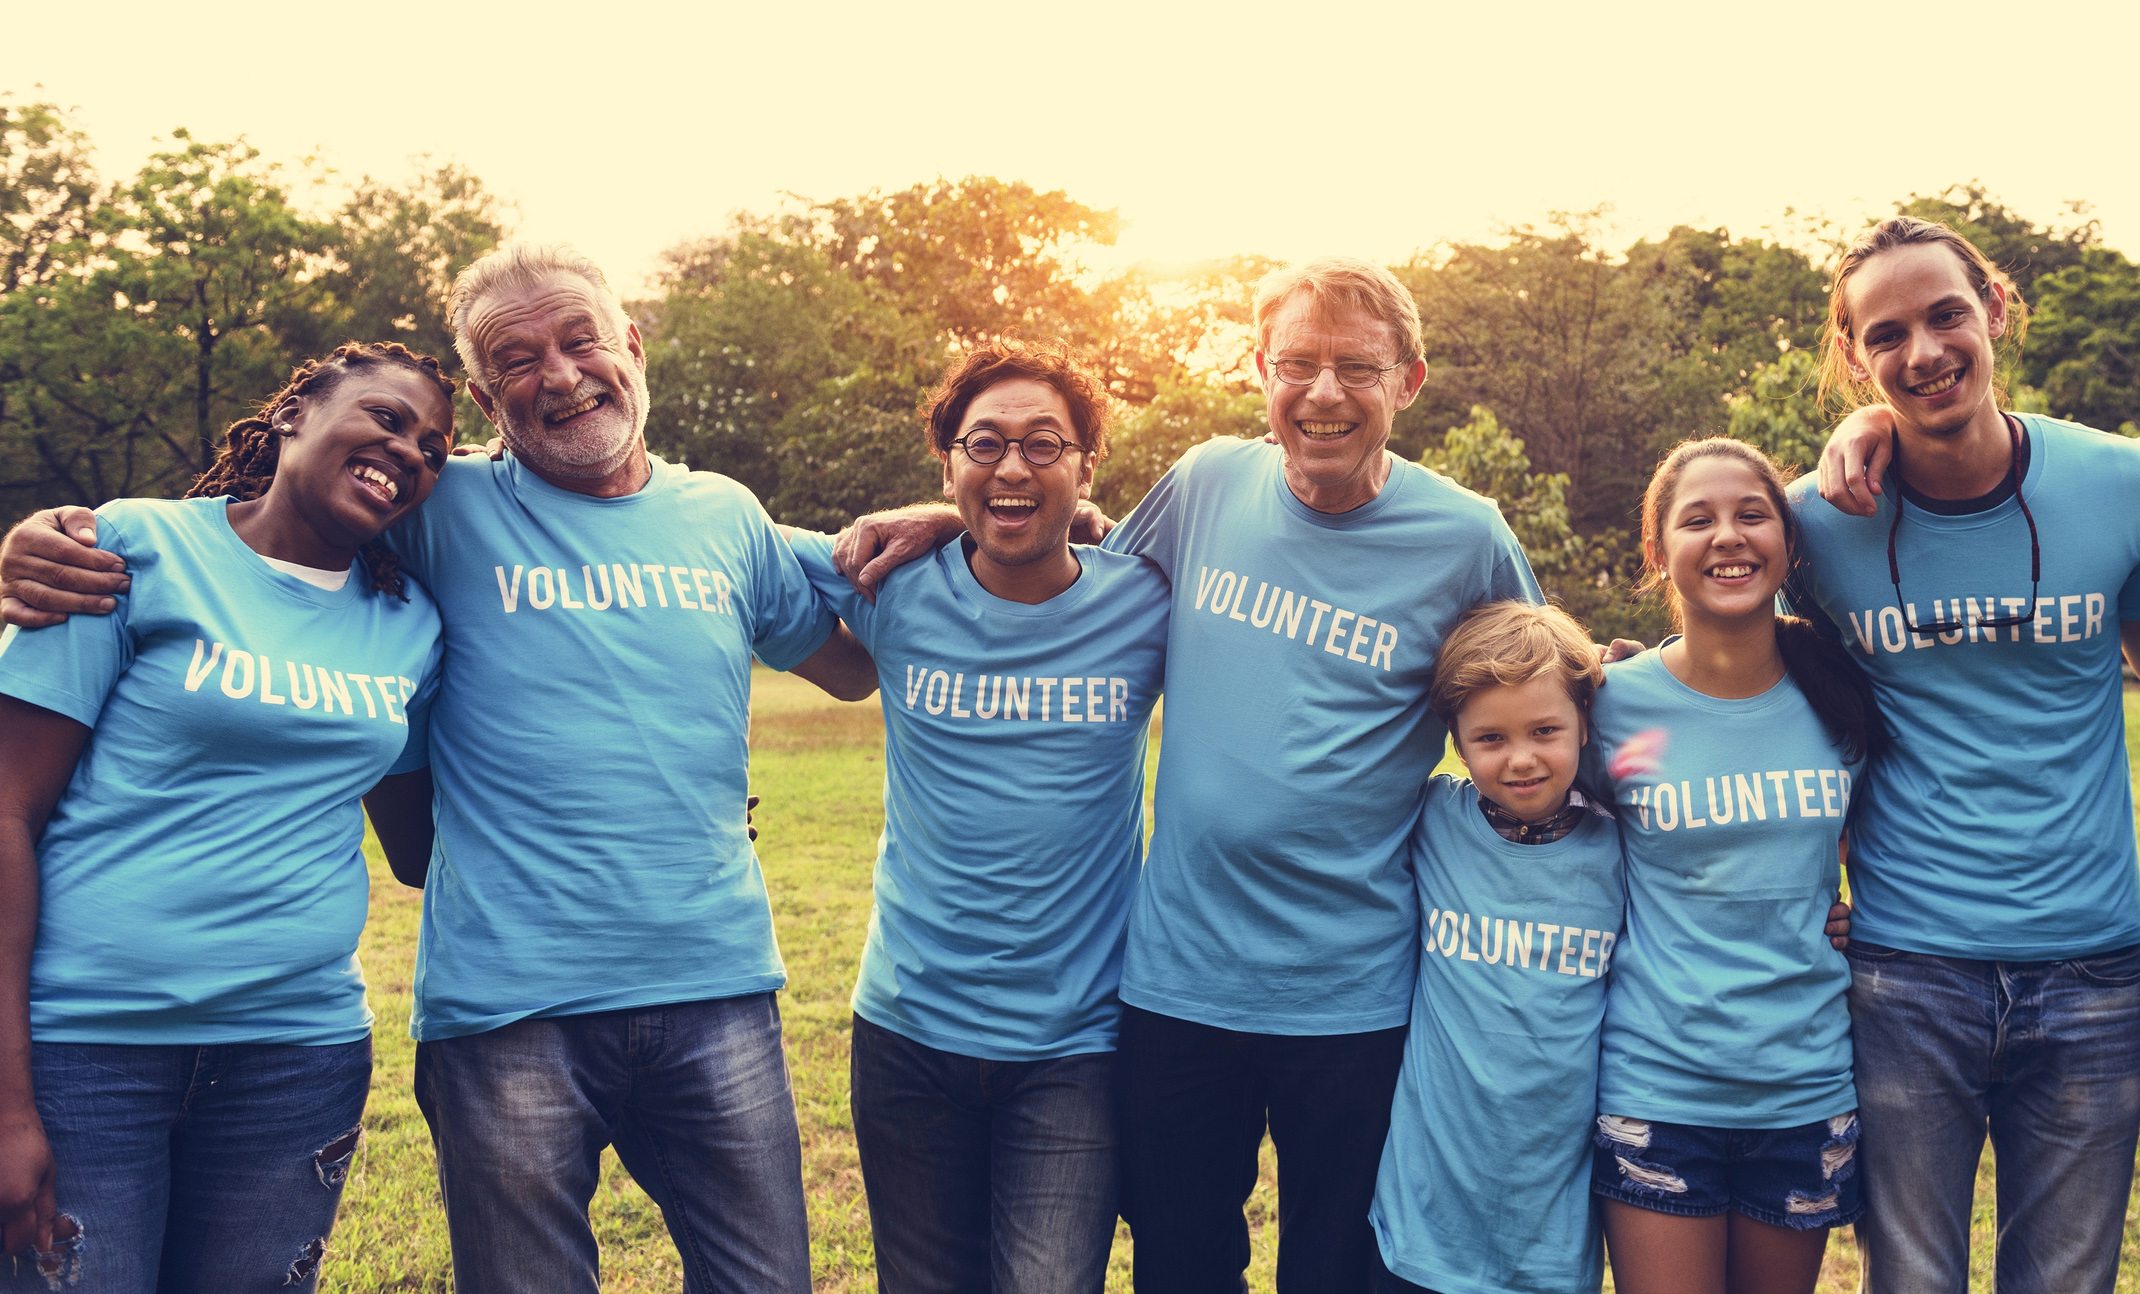 Group of Diverse People as Volunteer Community Service Together